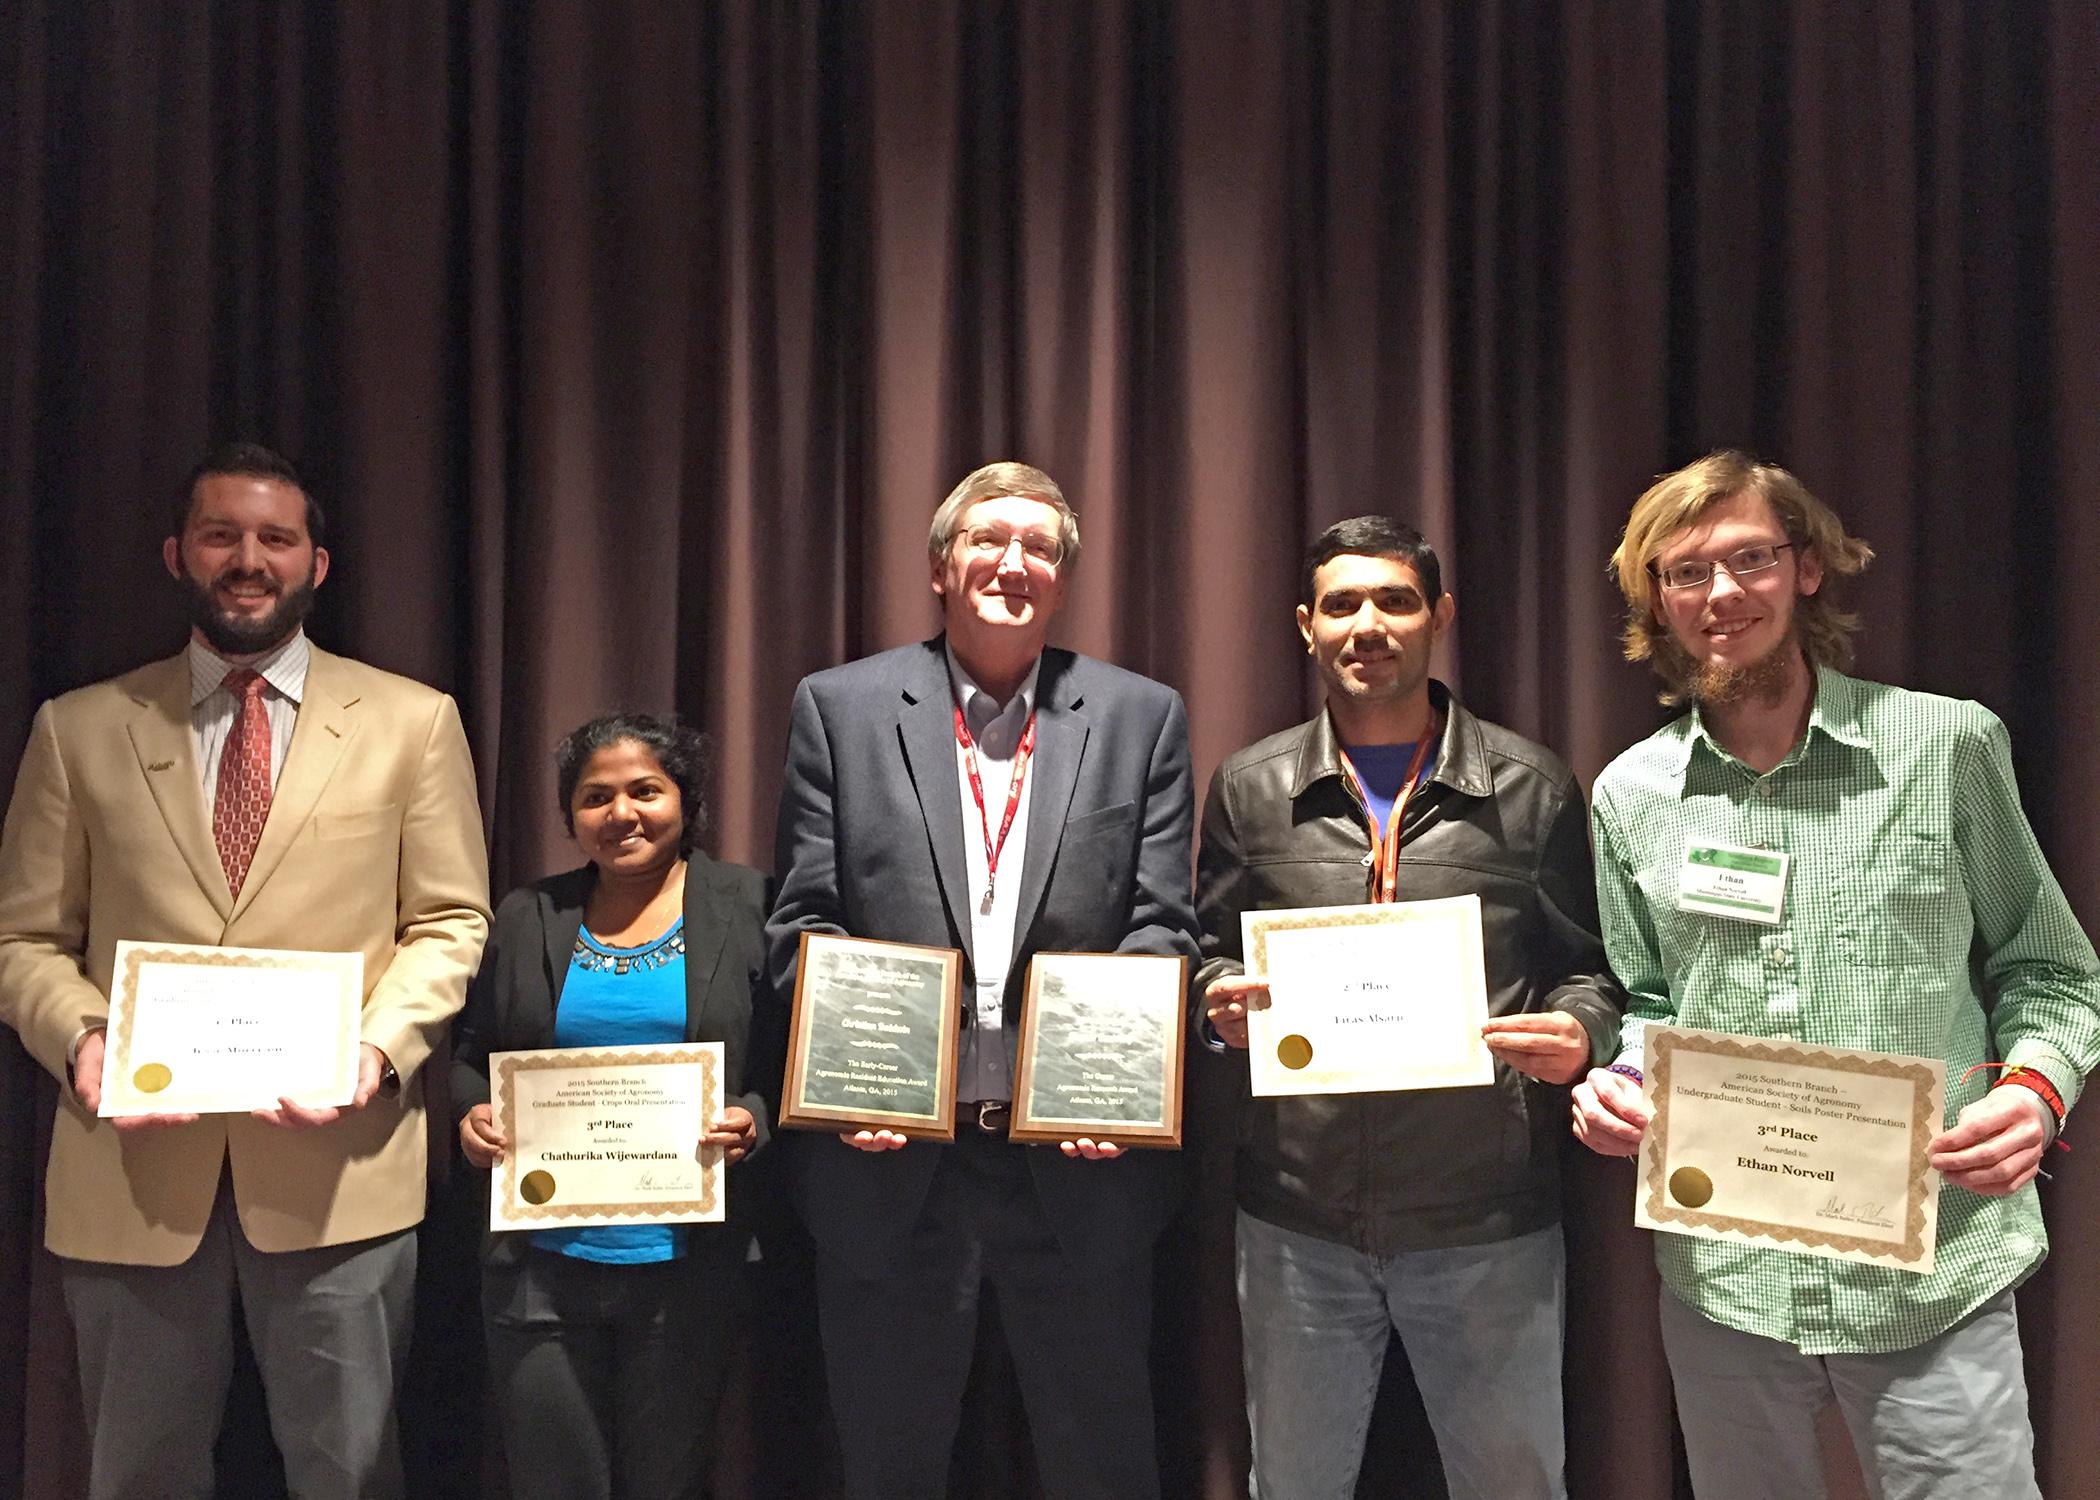 Mike Phillips, center, head of the Mississippi State University Department of Plant and Soil Sciences, joins faculty members and students from his department displaying awards received during a recent meeting of the Southern Branch of the American Society of Agronomy. Pictured are (from left to right) Jesse Morrison, doctoral student; Chathurika Wijewardana, master's student; Phillips (holding awards for Normie Buehring and Christian Baldwin); Firas Alsajri, doctoral student; and Ethan Norvell, undergraduat